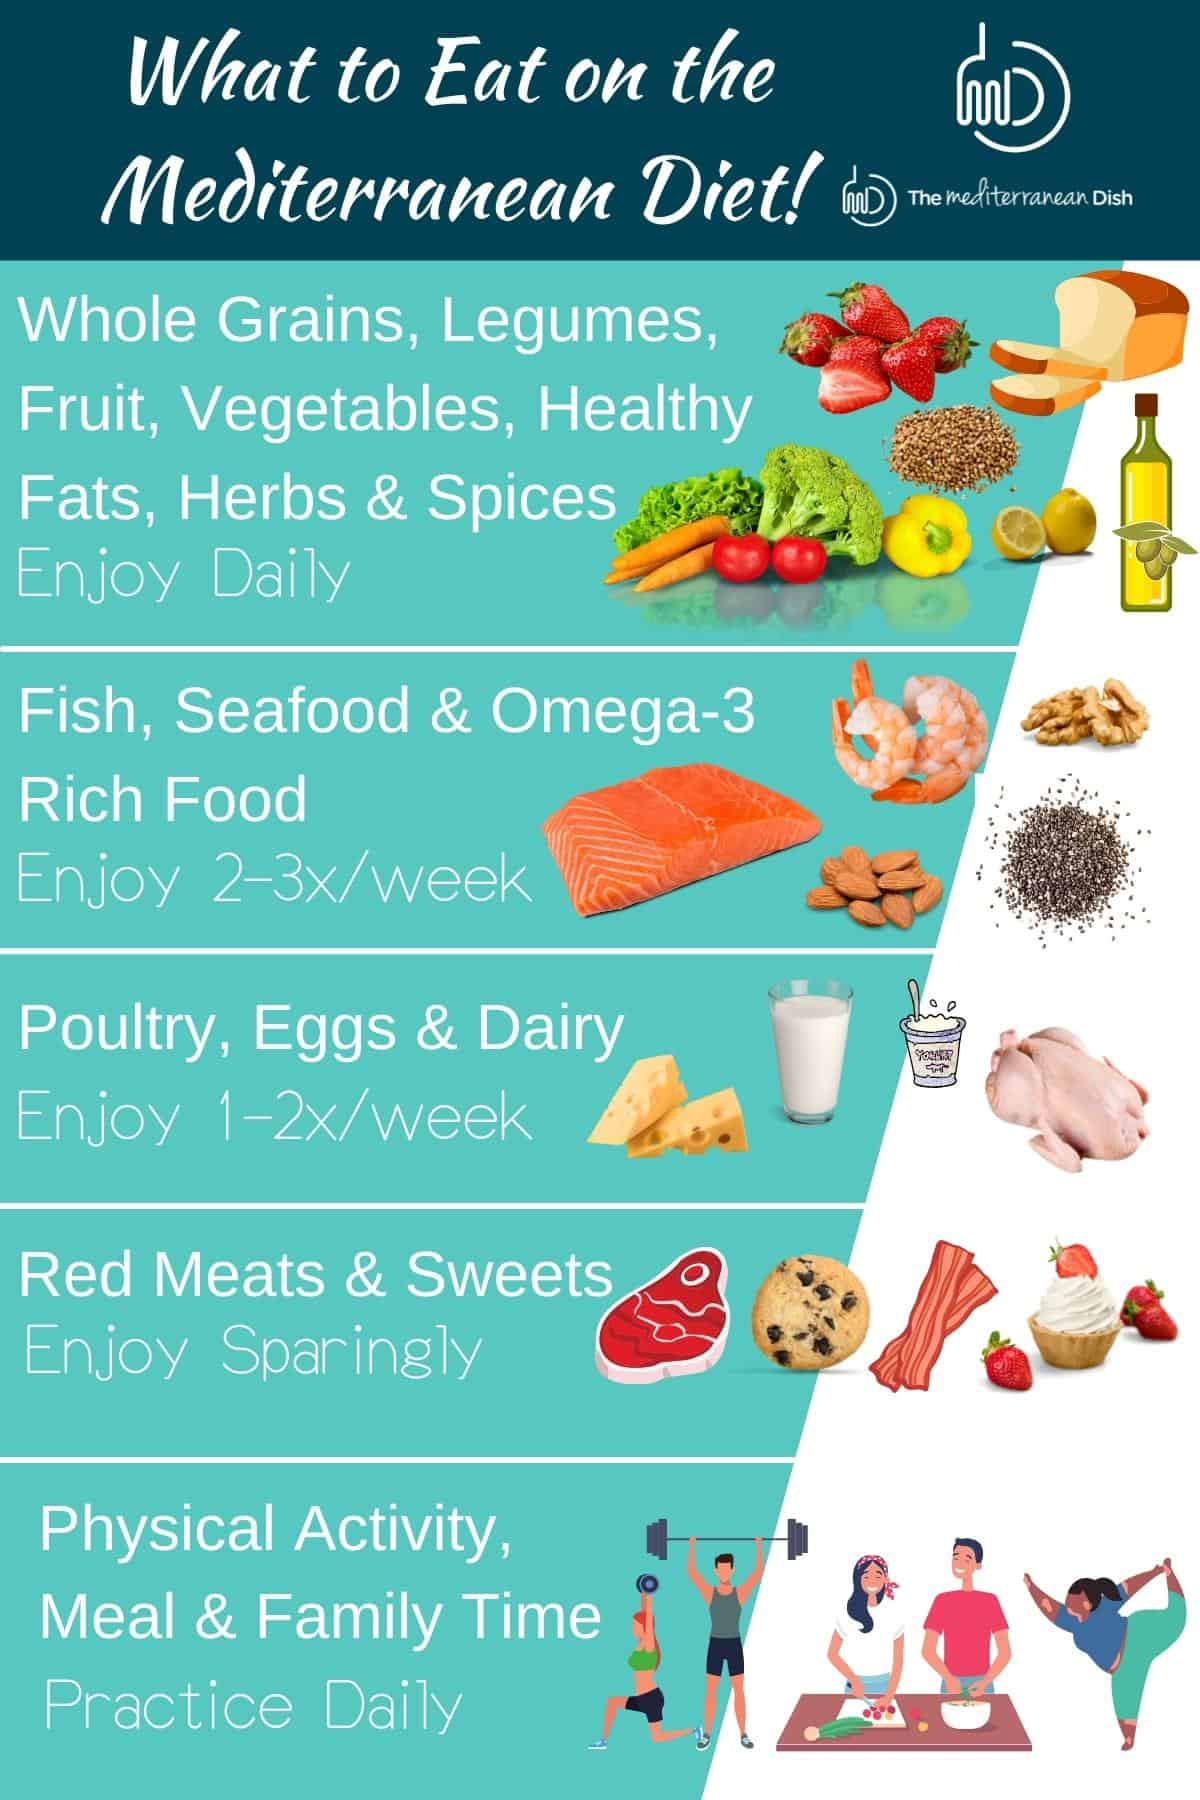 A graphic indicating a food list for what to eat on the Mediterranean diet